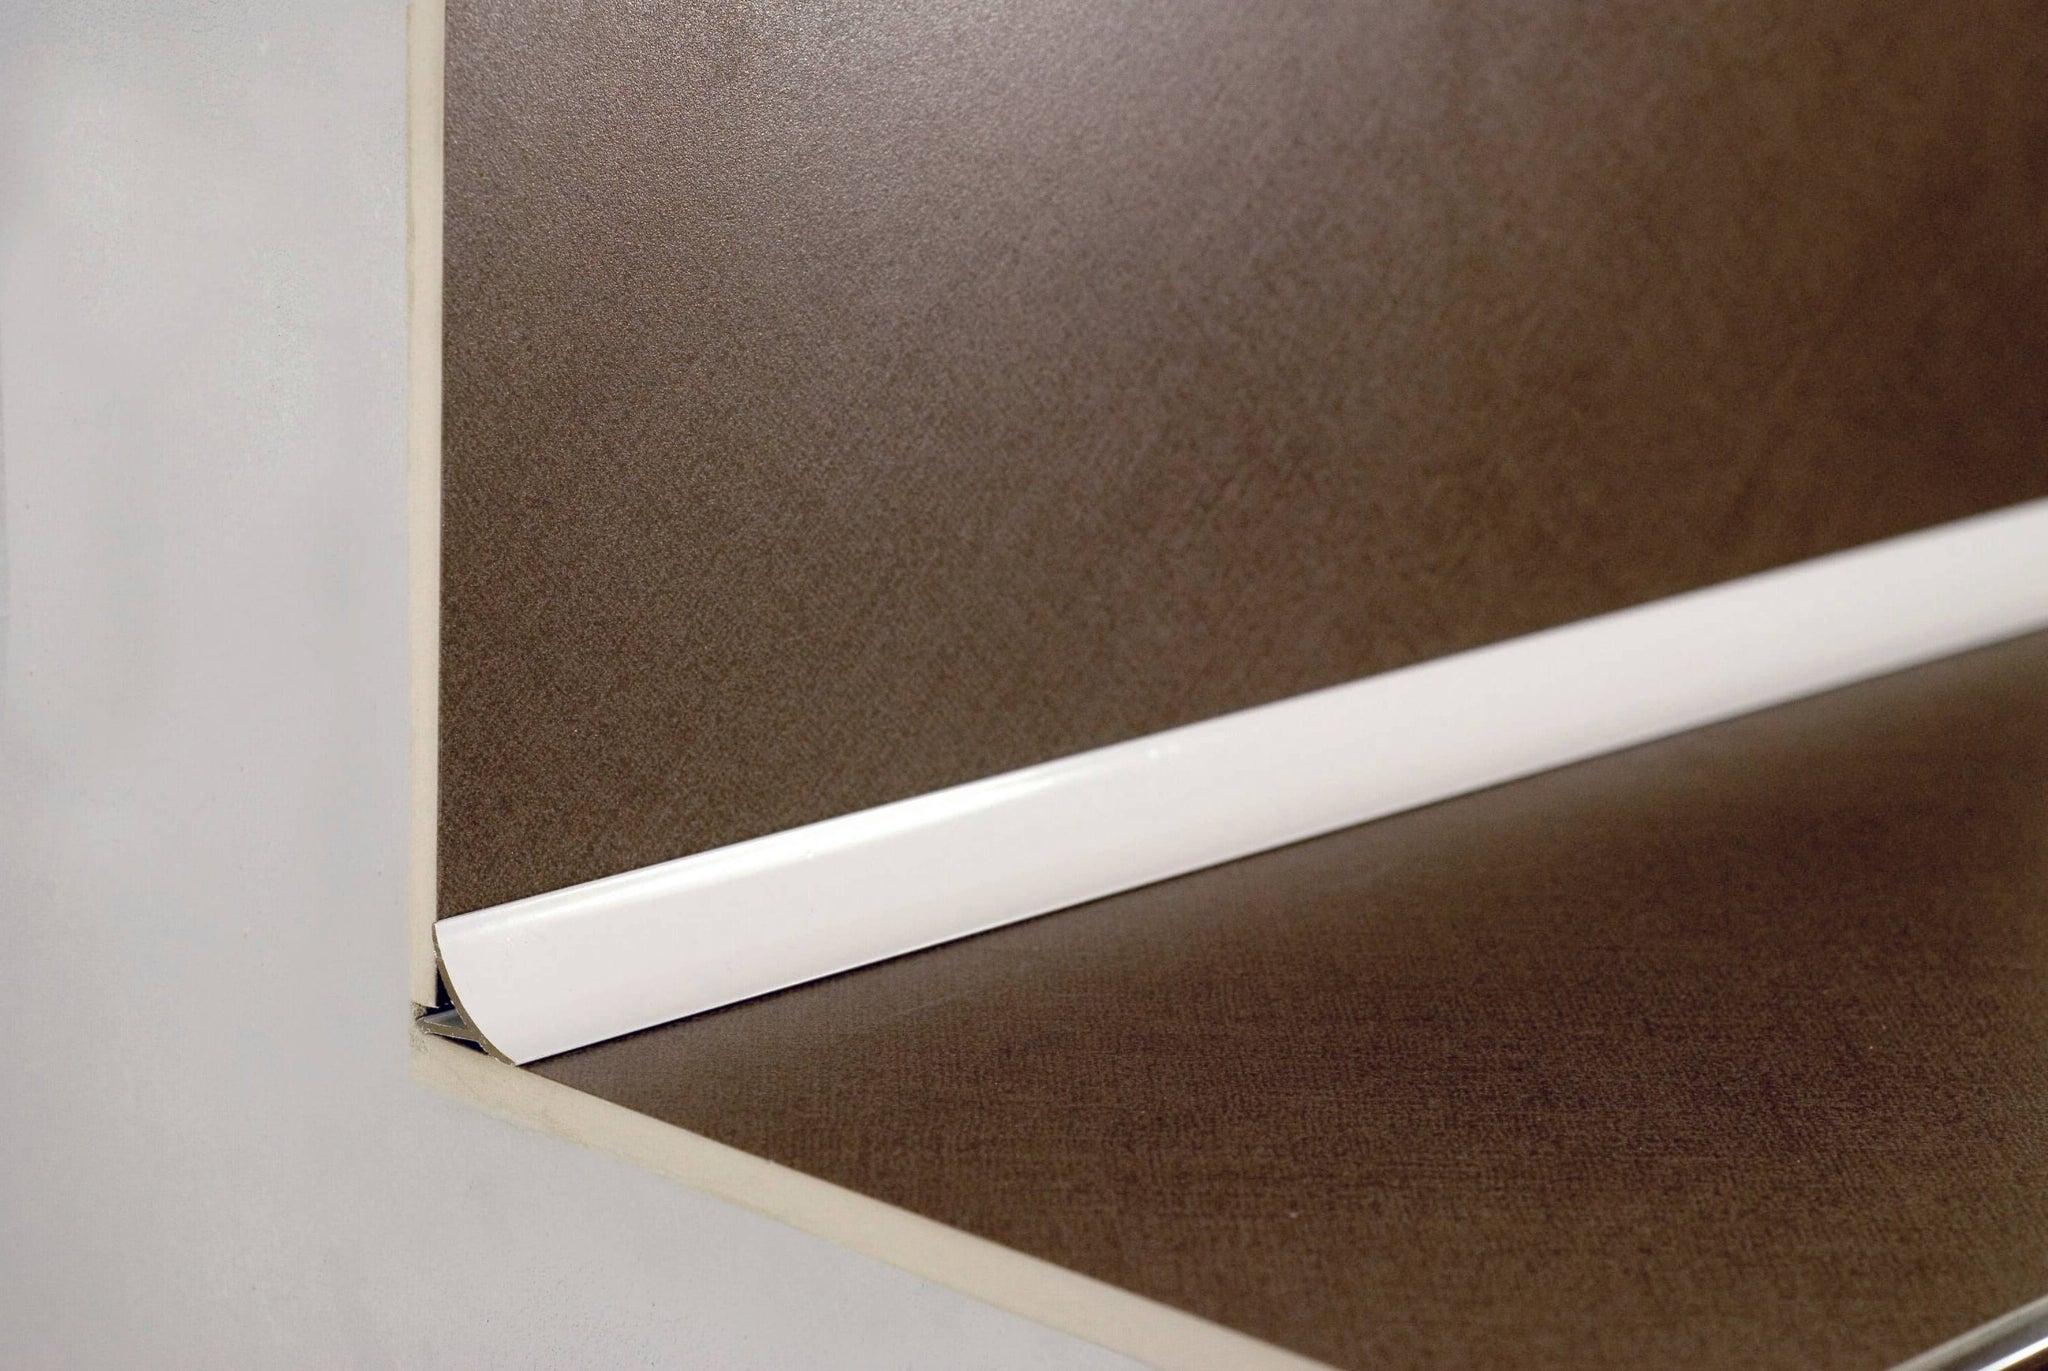 T-COVE Connection Trim 7/8 in. Aluminum - White- Anodized - Tile Edge Trim by Dural